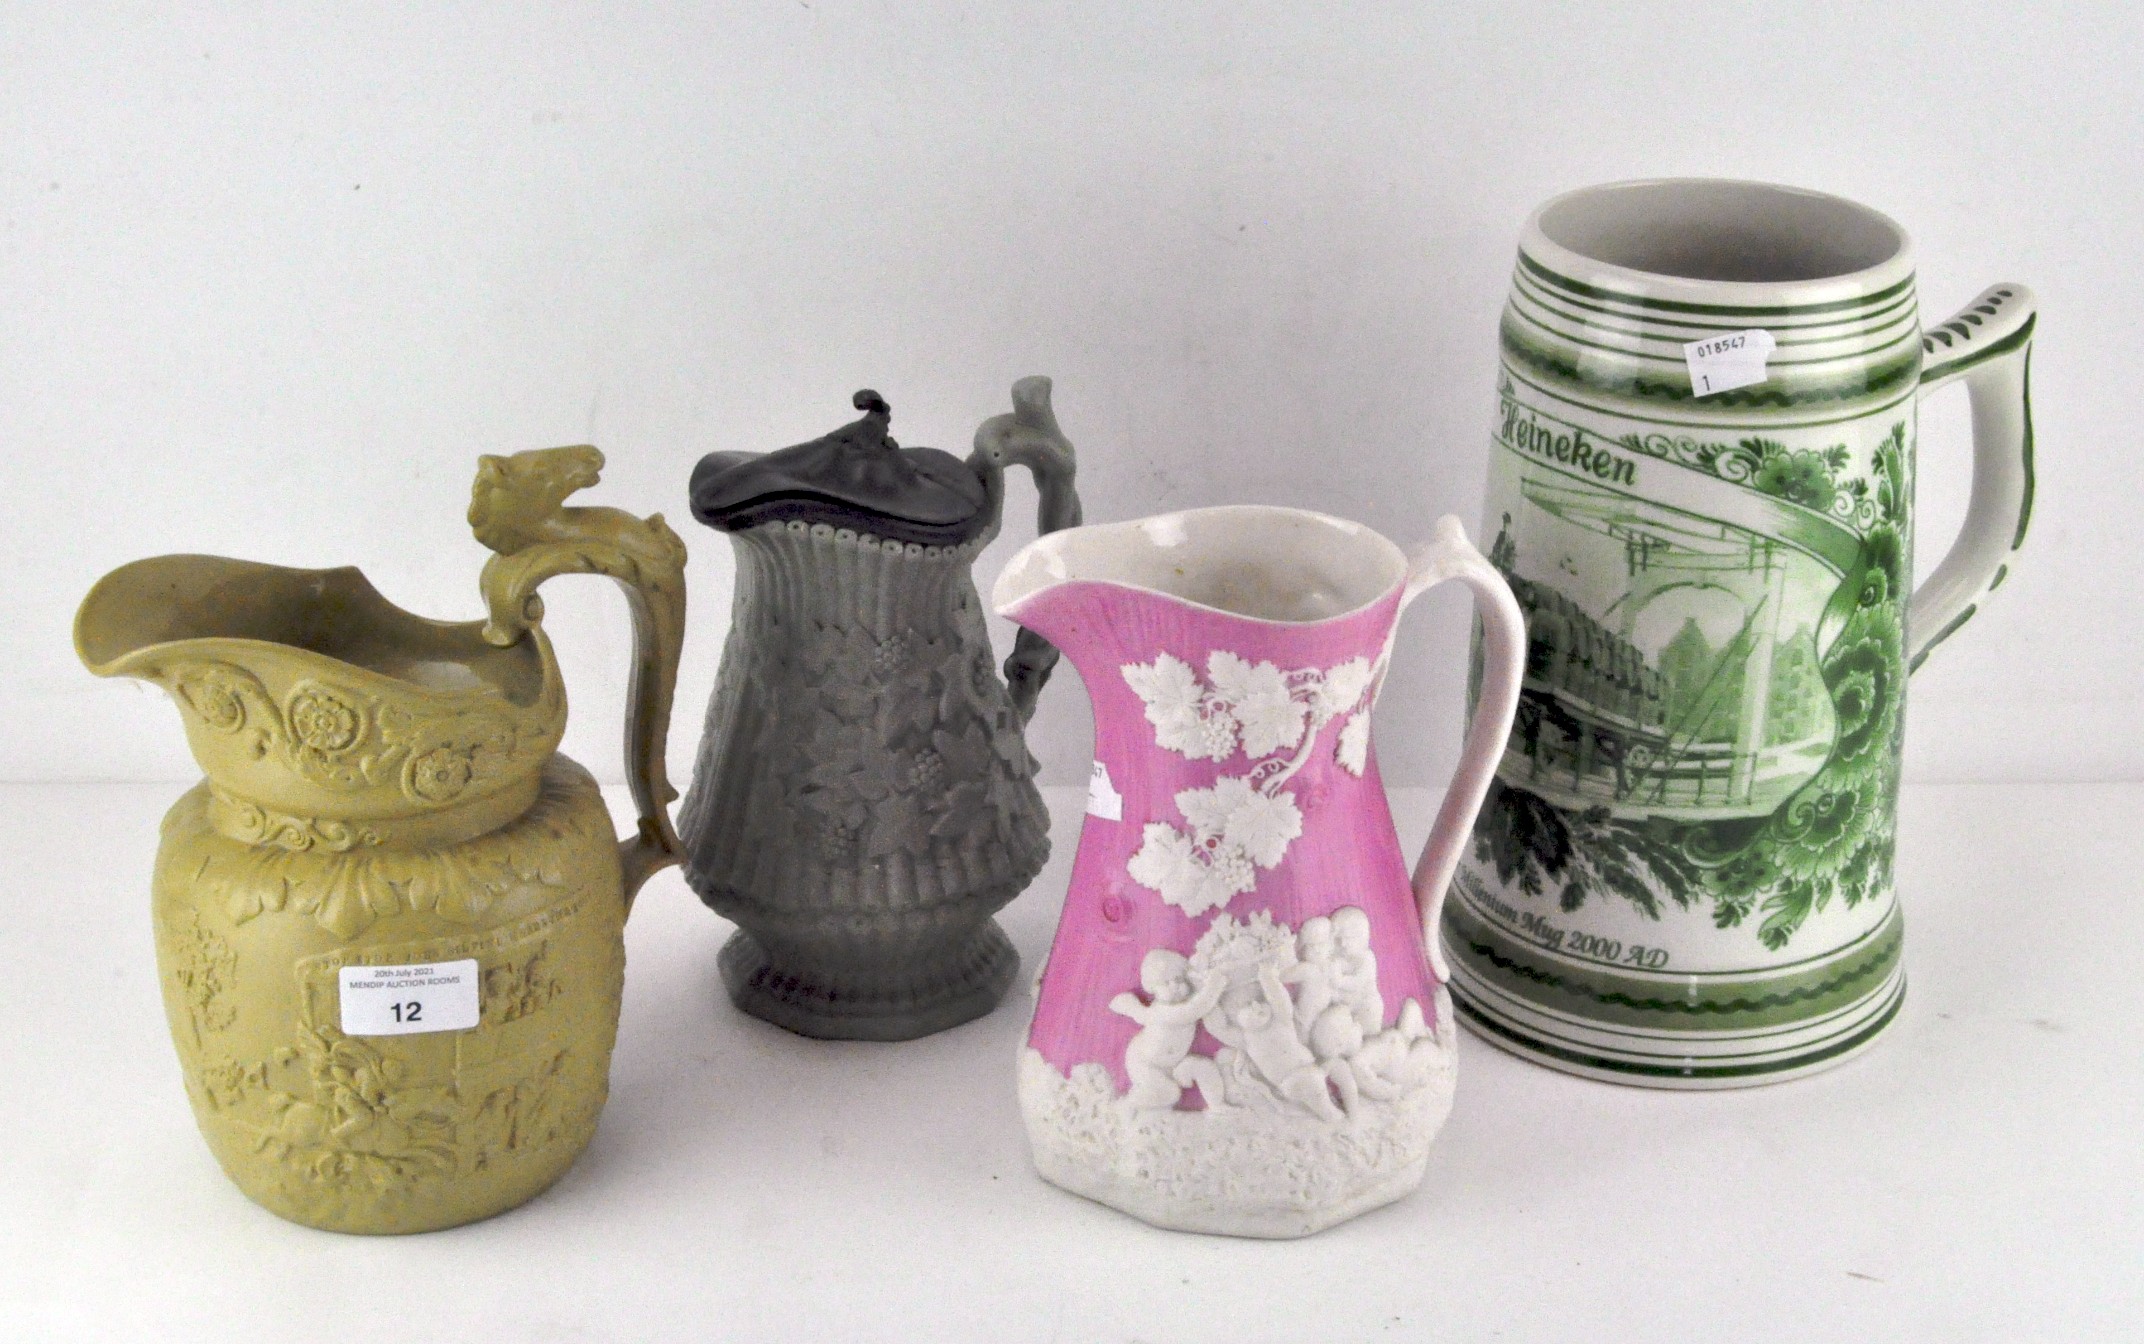 Three Staffordshire relief moulded stoneware or pottery jugs, including a Ridgway jug